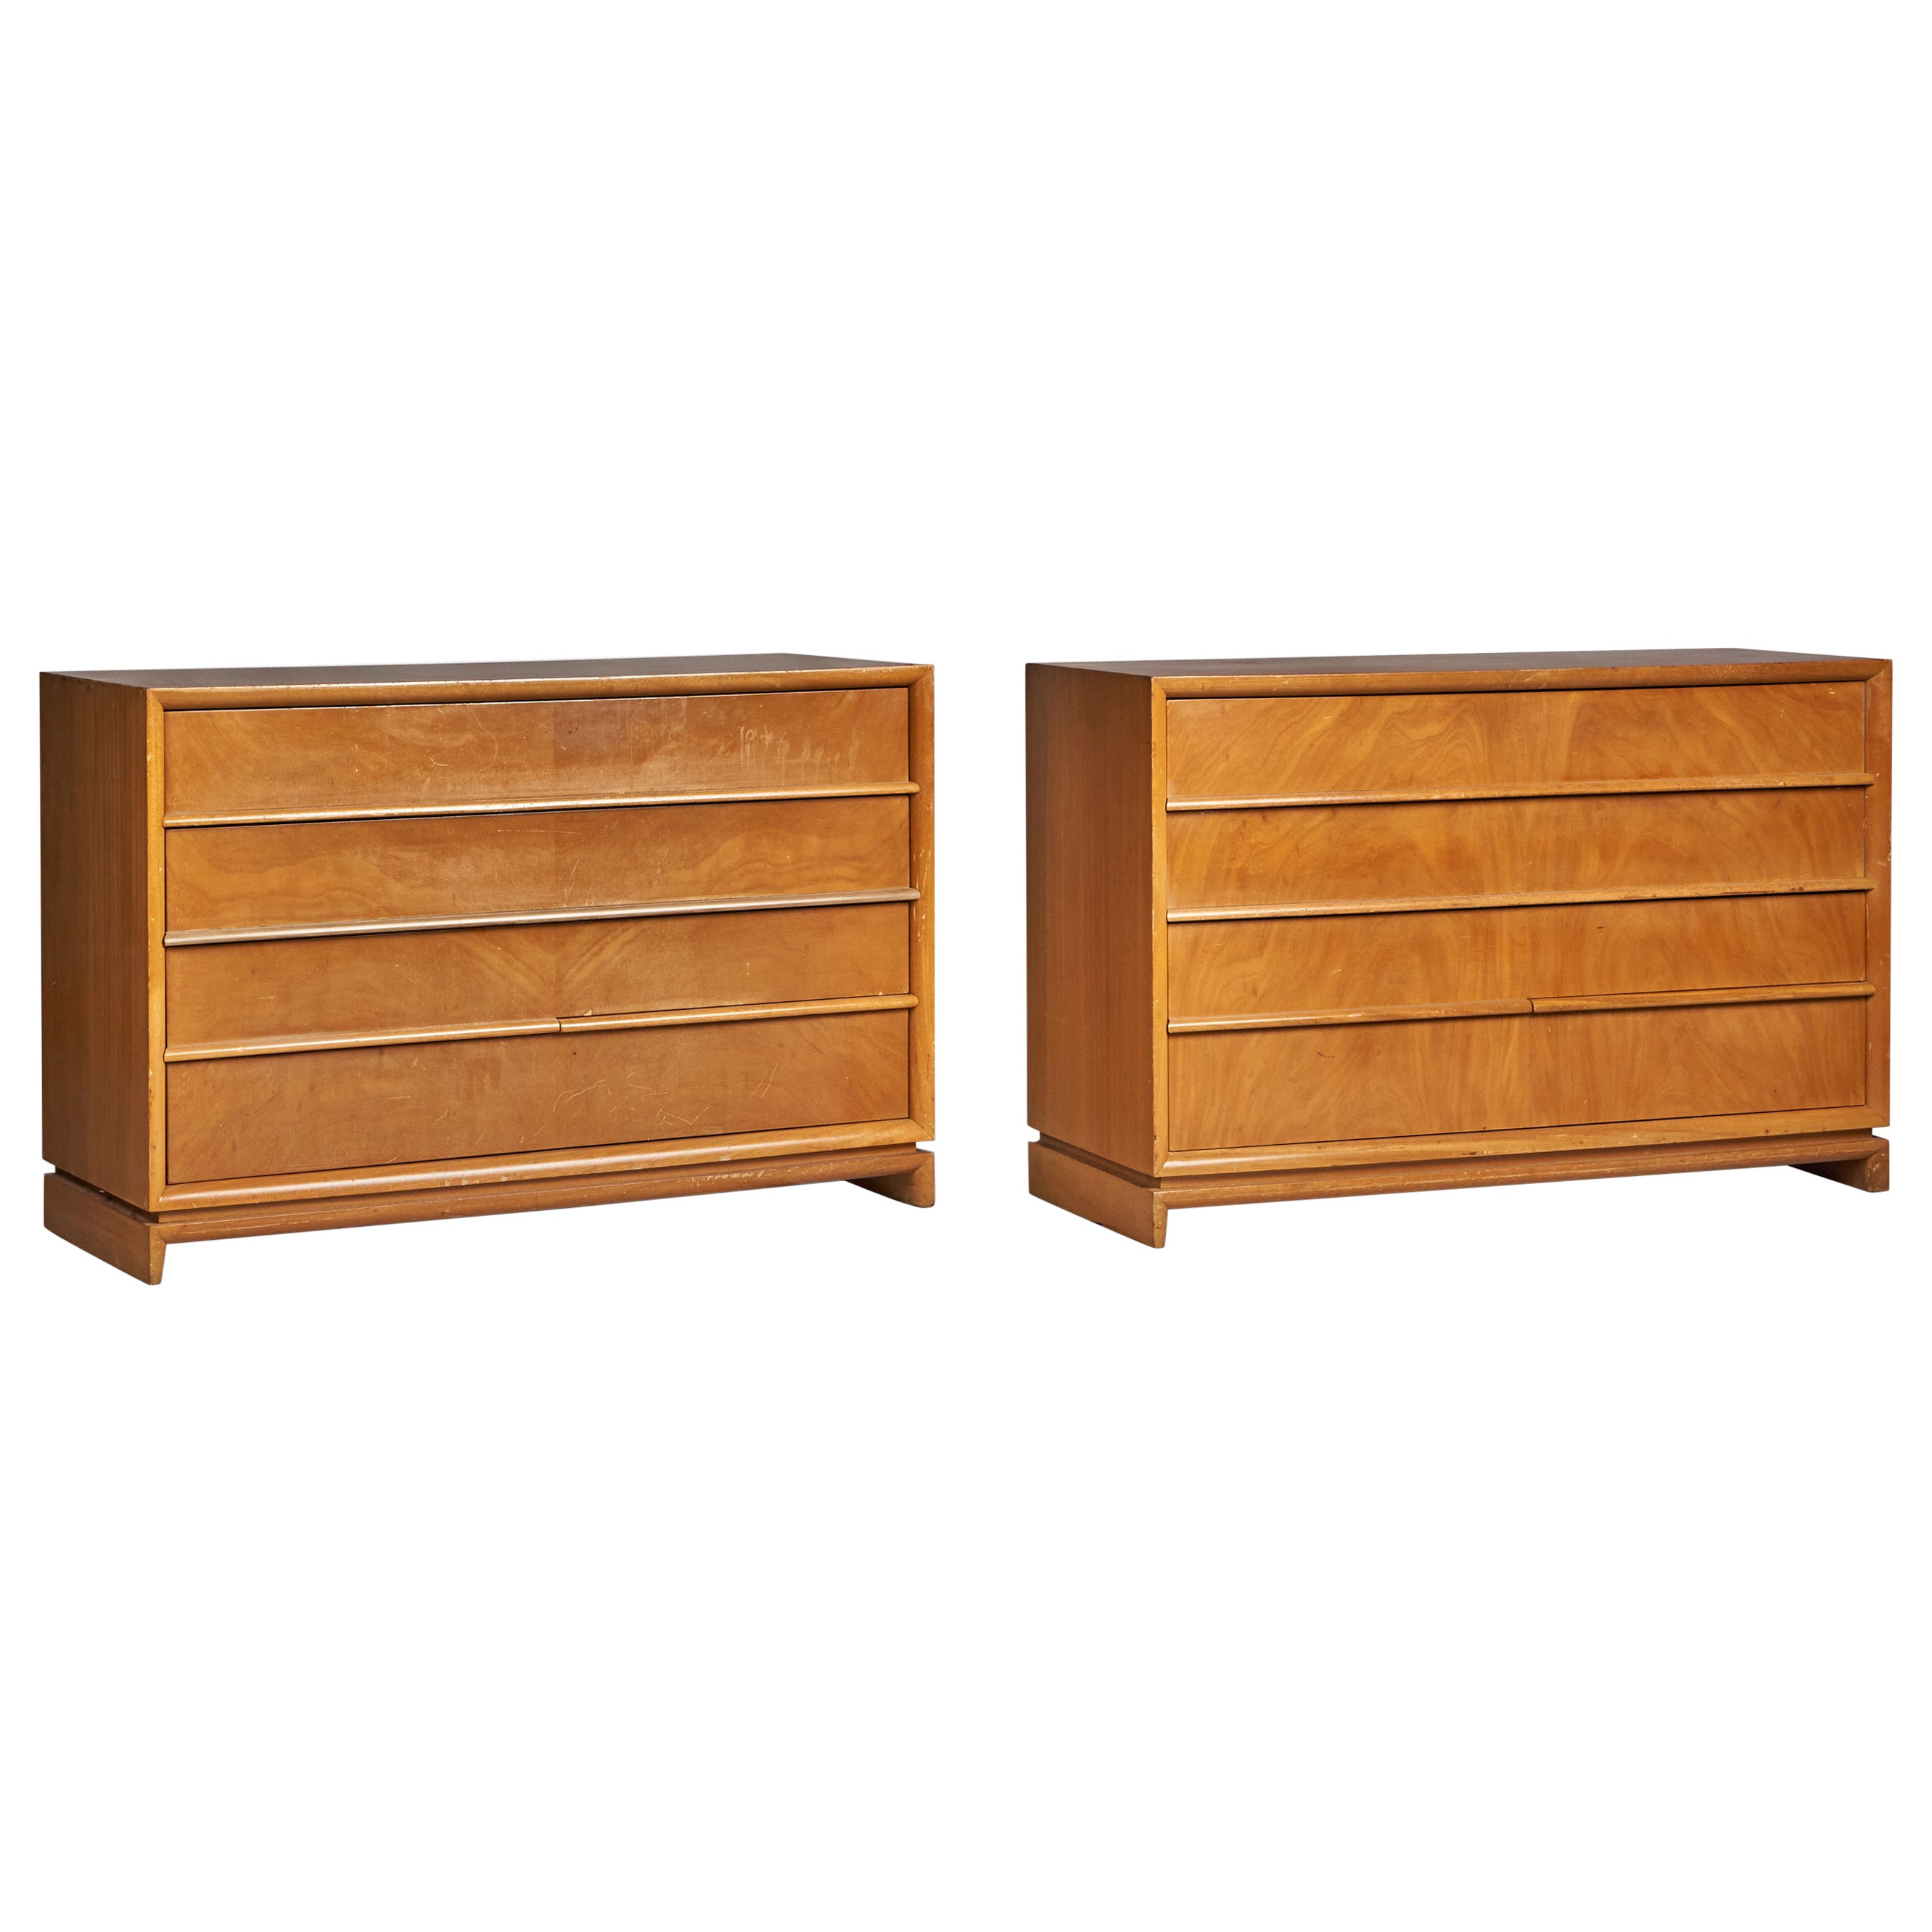 Red Lion Furniture, Dressers, Walnut, USA, 1940s For Sale